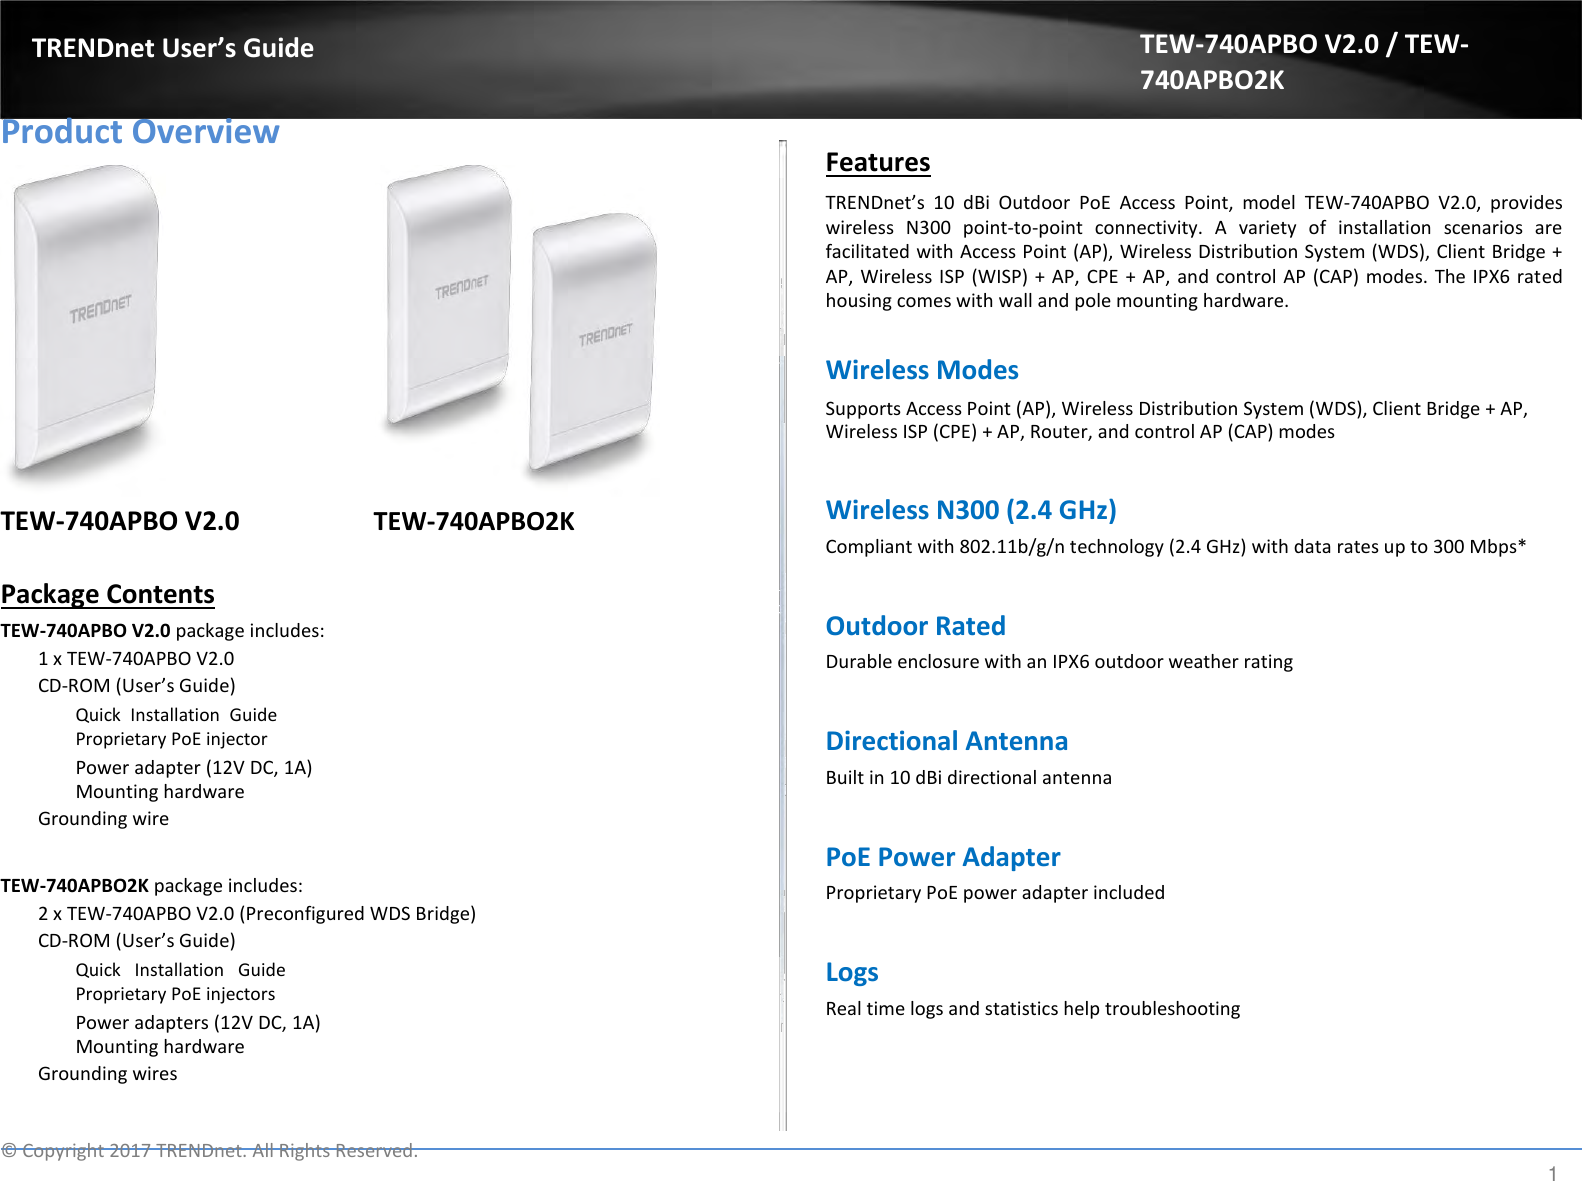  TRENDnet User’s Guide   Product Overview                 TEW-740APBO V2.0 TEW-740APBO2K  Package Contents  TEW-740APBO V2.0 package includes:  1 x TEW-740APBO V2.0  CD-ROM (User’s Guide)  Quick  Installation  Guide Proprietary PoE injector  Power adapter (12V DC, 1A) Mounting hardware  Grounding wire   TEW-740APBO2K package includes:  2 x TEW-740APBO V2.0 (Preconfigured WDS Bridge)  CD-ROM (User’s Guide)  Quick  Installation  Guide Proprietary PoE injectors  Power adapters (12V DC, 1A) Mounting hardware  Grounding wires TEW-740APBO V2.0 / TEW-740APBO2K   Features  TRENDnet’s  10  dBi  Outdoor  PoE  Access  Point,  model  TEW-740APBO  V2.0,  provides wireless  N300  point-to-point  connectivity.  A  variety  of  installation  scenarios  are facilitated with Access Point (AP), Wireless Distribution System (WDS), Client Bridge + AP, Wireless ISP (WISP)  + AP, CPE + AP, and control AP (CAP) modes. The IPX6 rated housing comes with wall and pole mounting hardware.  Wireless Modes  Supports Access Point (AP), Wireless Distribution System (WDS), Client Bridge + AP, Wireless ISP (CPE) + AP, Router, and control AP (CAP) modes   Wireless N300 (2.4 GHz)  Compliant with 802.11b/g/n technology (2.4 GHz) with data rates up to 300 Mbps*   Outdoor Rated  Durable enclosure with an IPX6 outdoor weather rating   Directional Antenna  Built in 10 dBi directional antenna   PoE Power Adapter  Proprietary PoE power adapter included   Logs  Real time logs and statistics help troubleshooting   ©  Copyright 2017 TRENDnet. All Rights Reserved. 1 